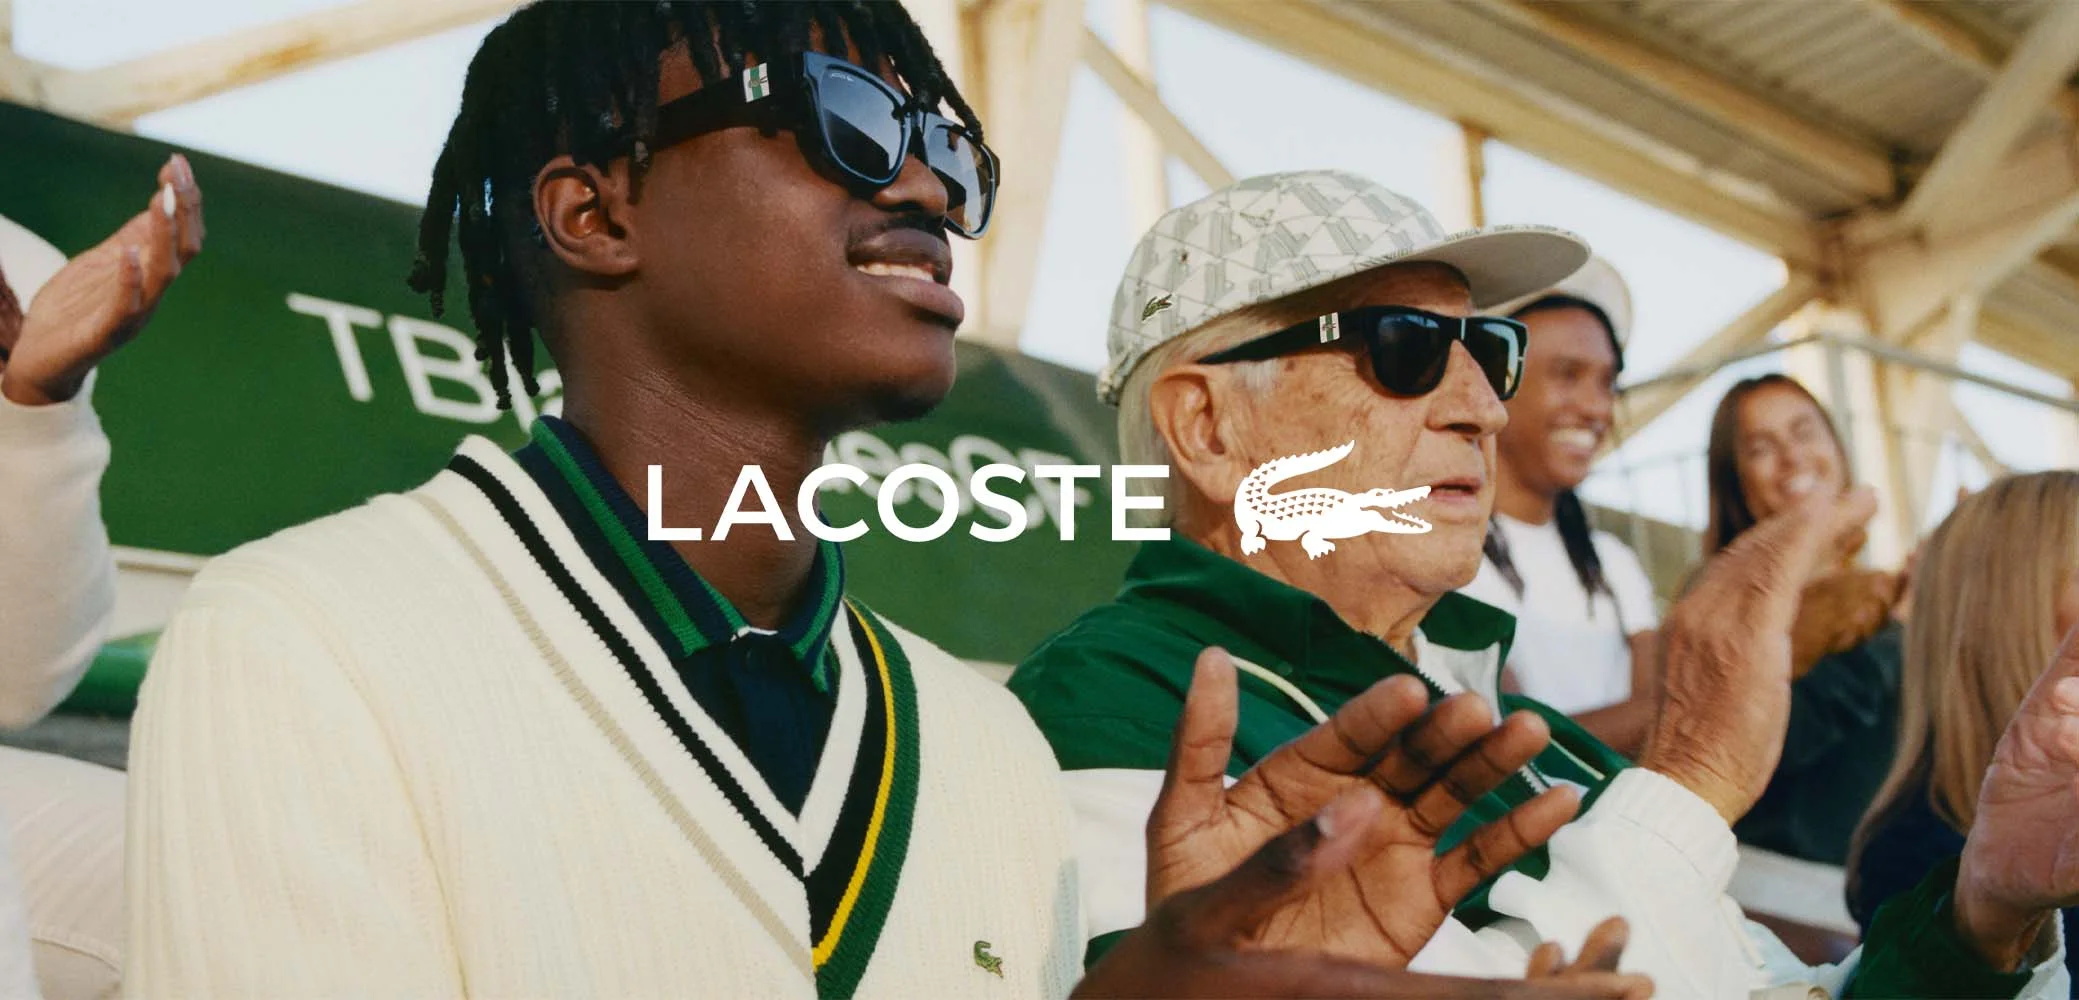 compromiso Goma Ilegible Lacoste Polo Shirt Price USA - Lacoste Factory Outlet Online